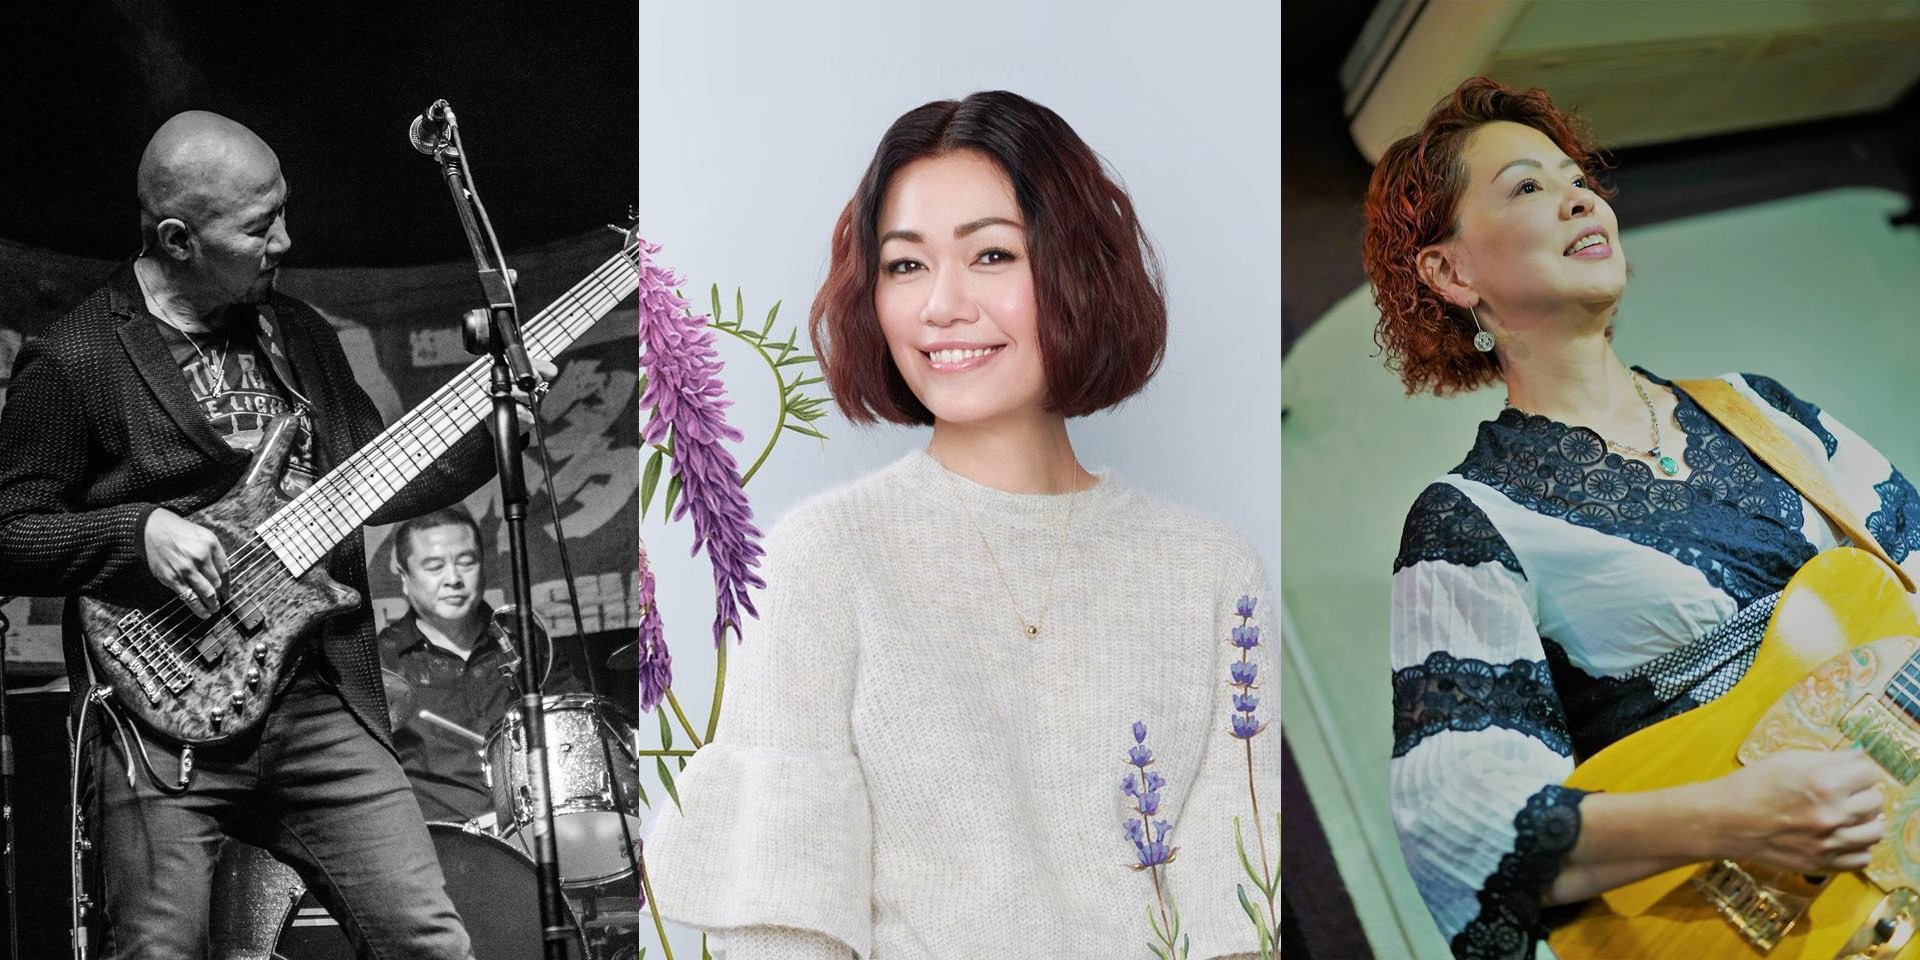 Timbre Music branches into Shanghai for Boogaloo music festival featuring Singaporean acts Joanna Dong, Raw Earth, and more